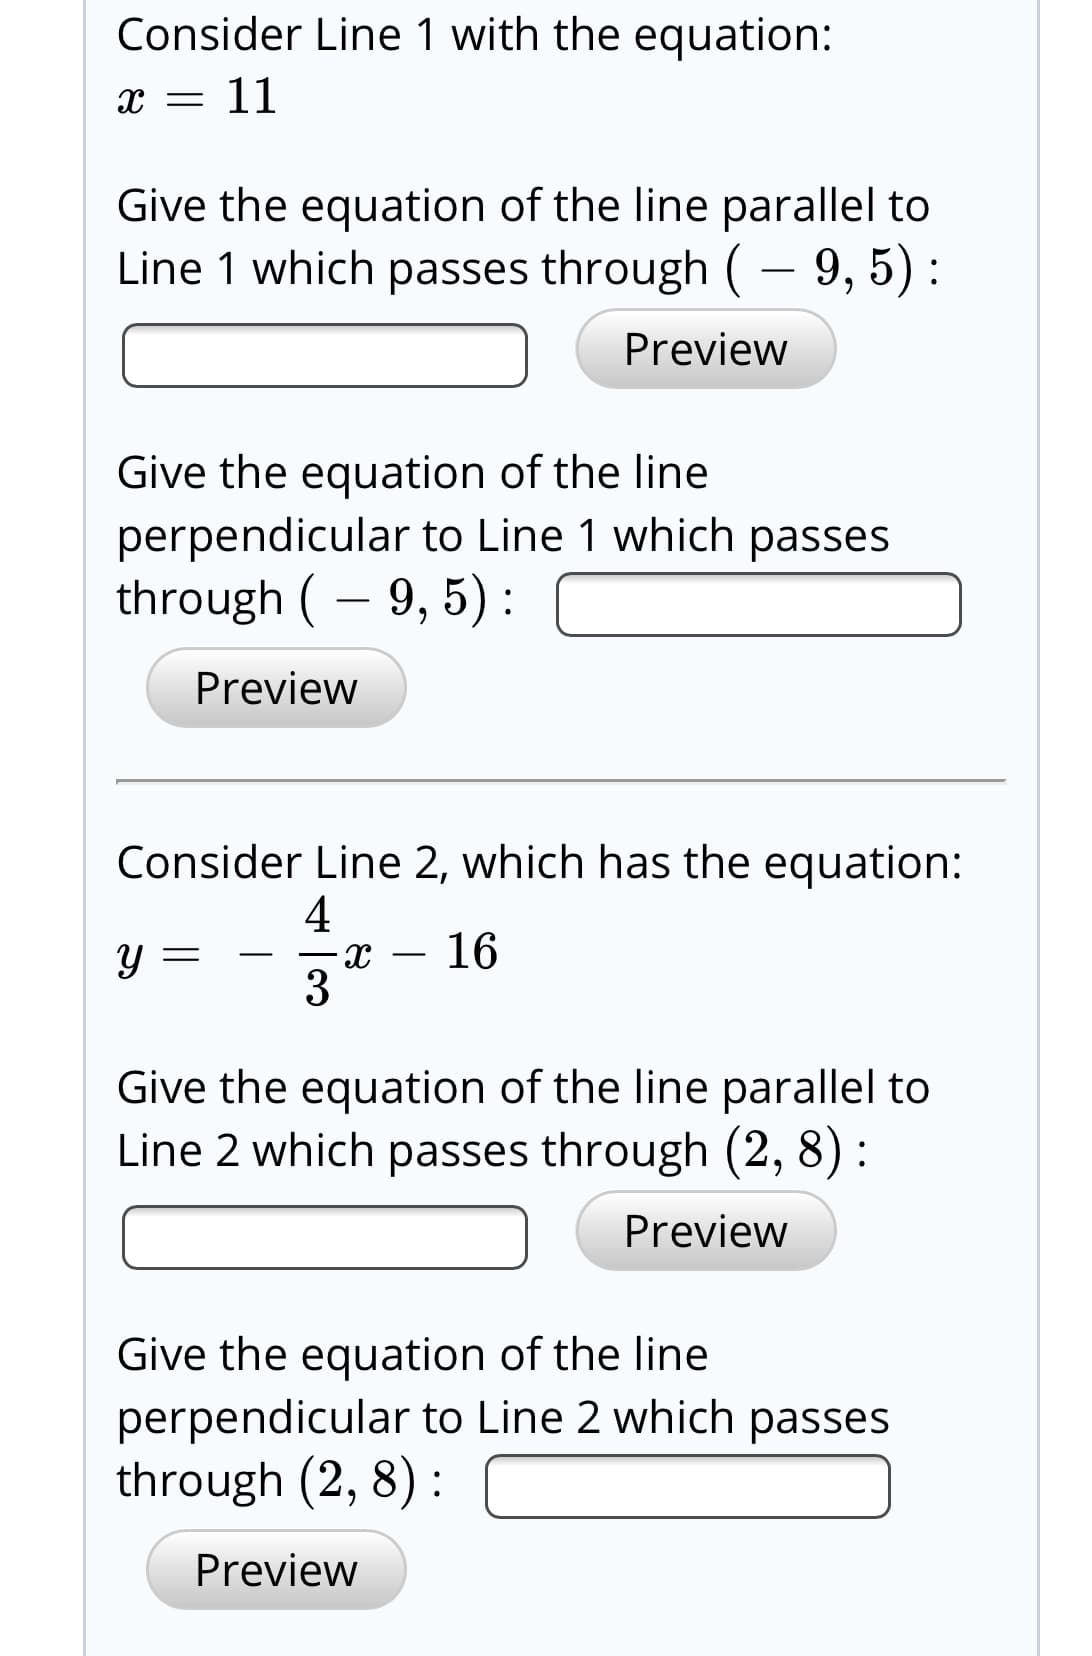 Consider Line 1 with the equation:
x = 11
Give the equation of the line parallel to
Line 1 which passes through ( – 9, 5) :
Preview
Give the equation of the line
perpendicular to Line 1 which passes
through ( – 9, 5):
Preview
Consider Line 2, which has the equation:
16
3
Give the equation of the line parallel to
Line 2 which passes through (2, 8) :
Preview
Give the equation of the line
perpendicular to Line 2 which passes
through (2, 8) :
Preview
